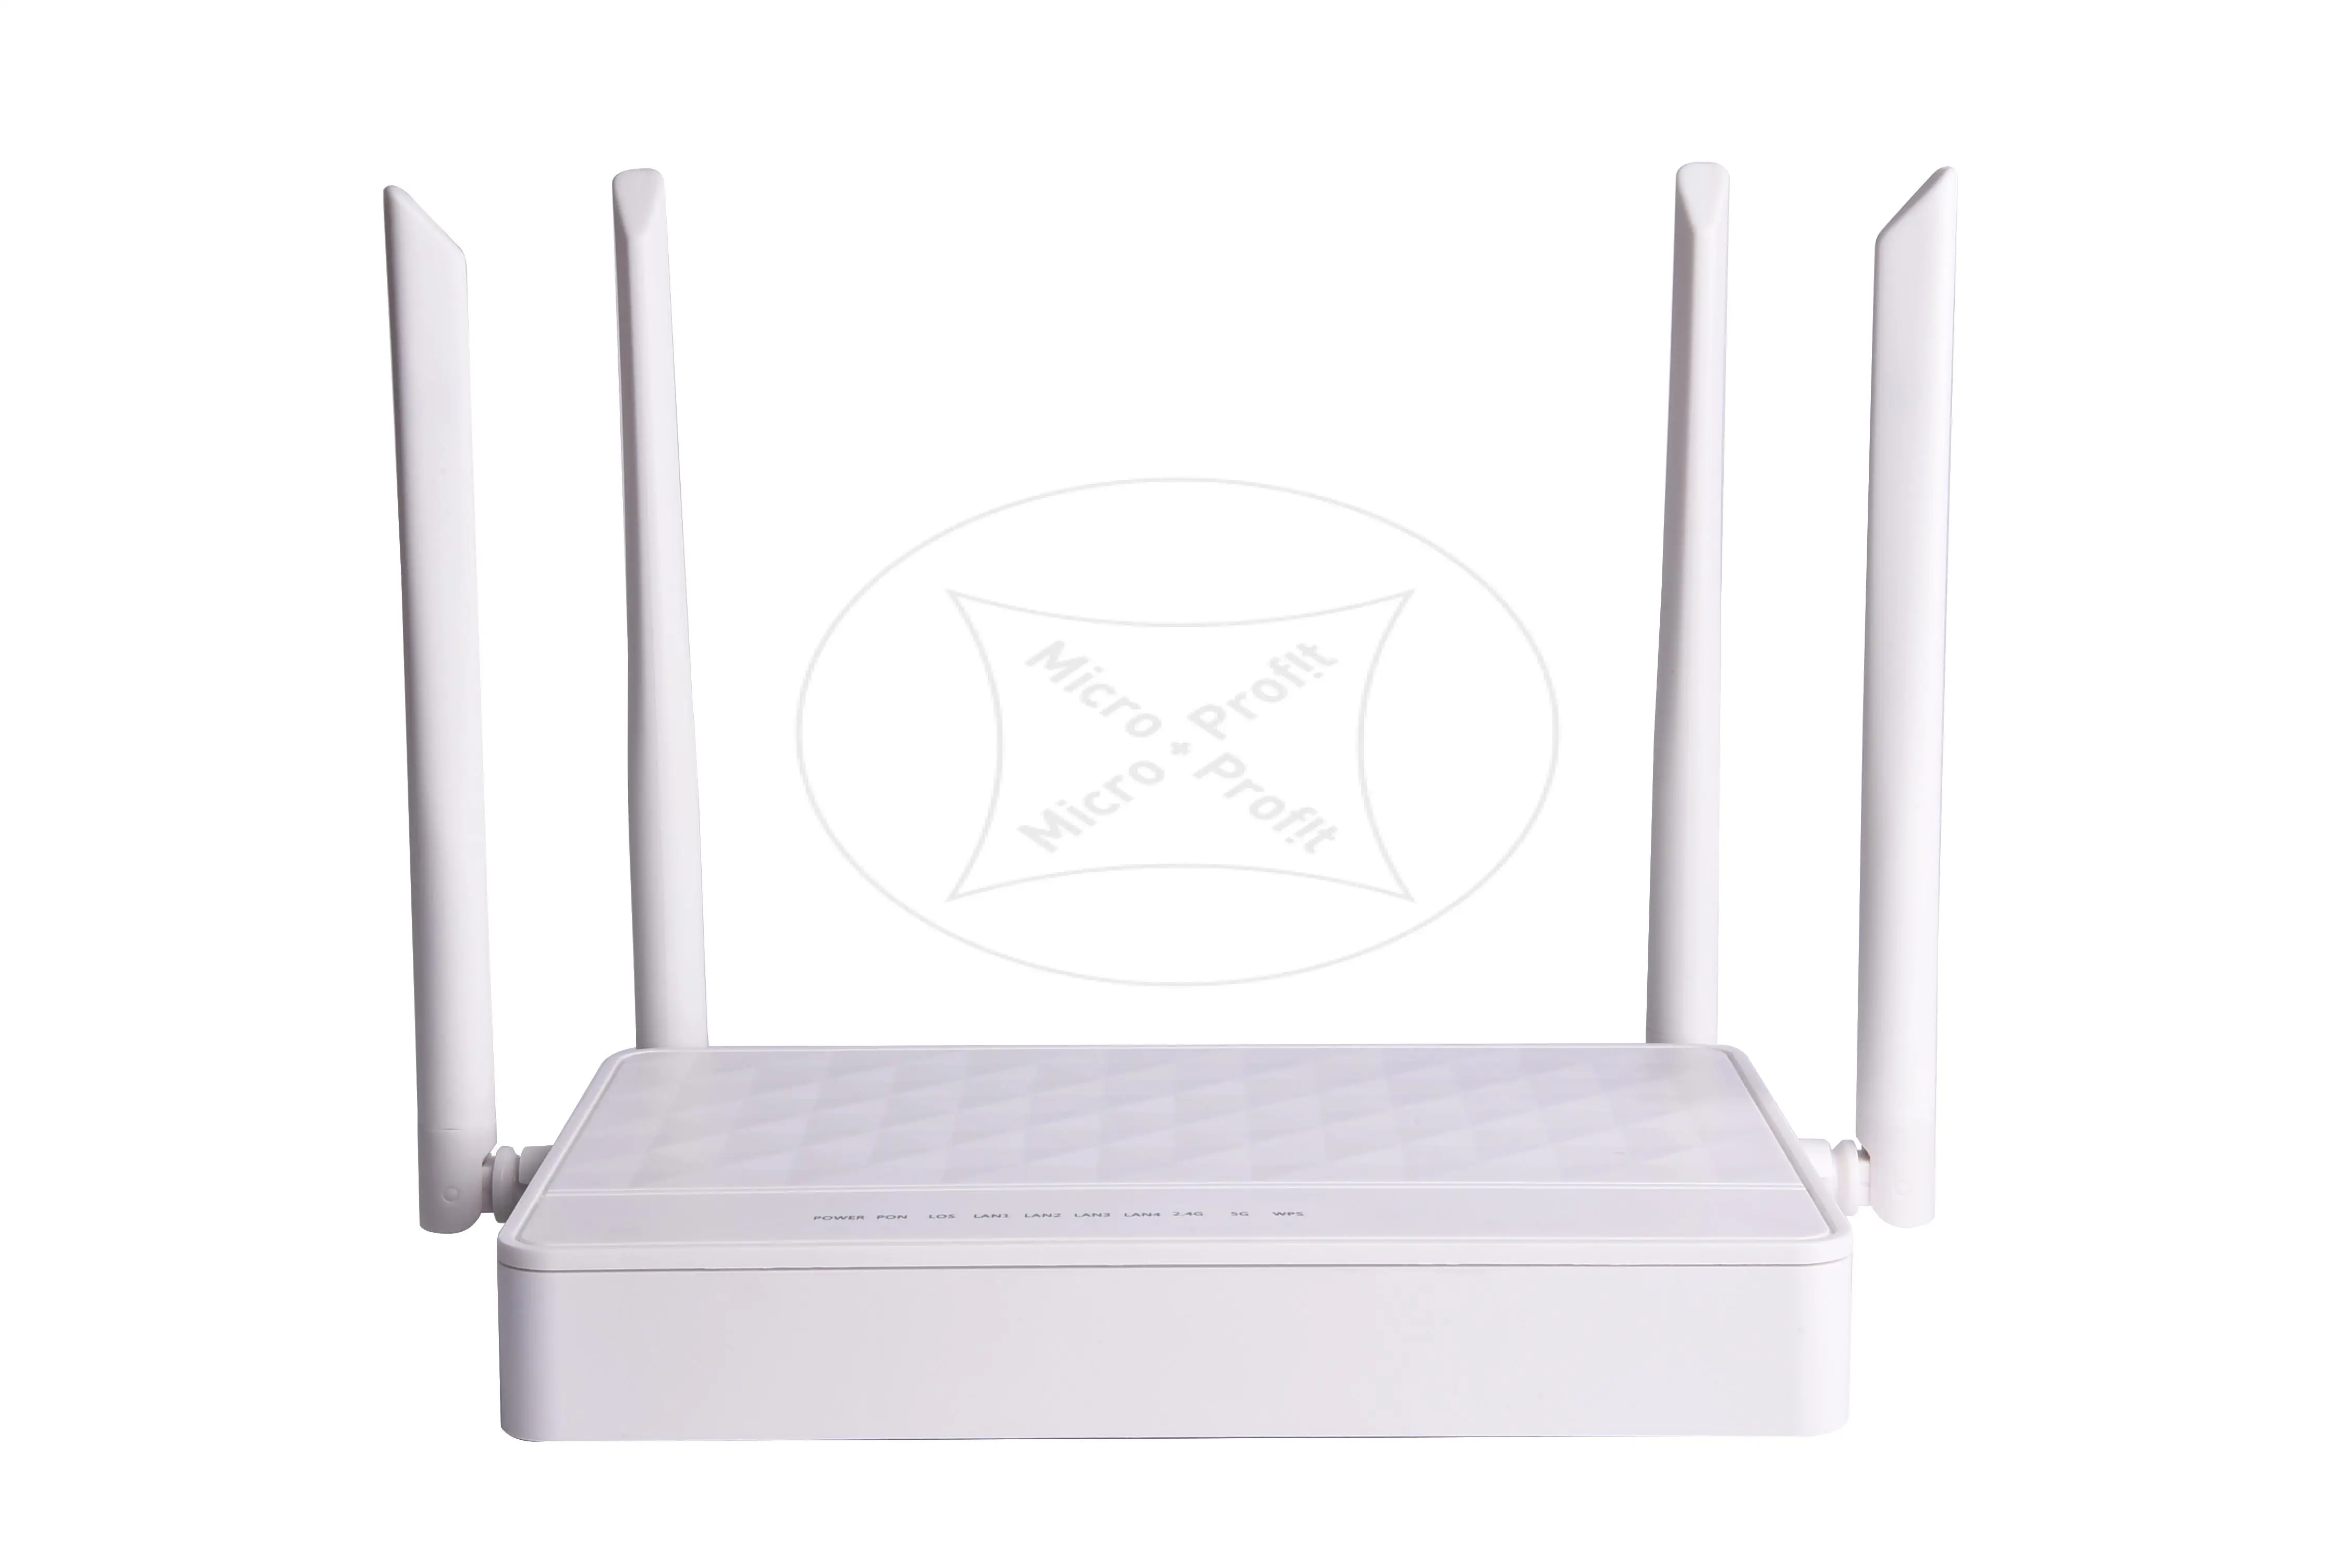 

BT711XR Dual Band WIFI XPON Gpon ONU FTTH Network 4GE 2VOIP 2.4G 5G CATV Router SCAPC Equipment free shipping